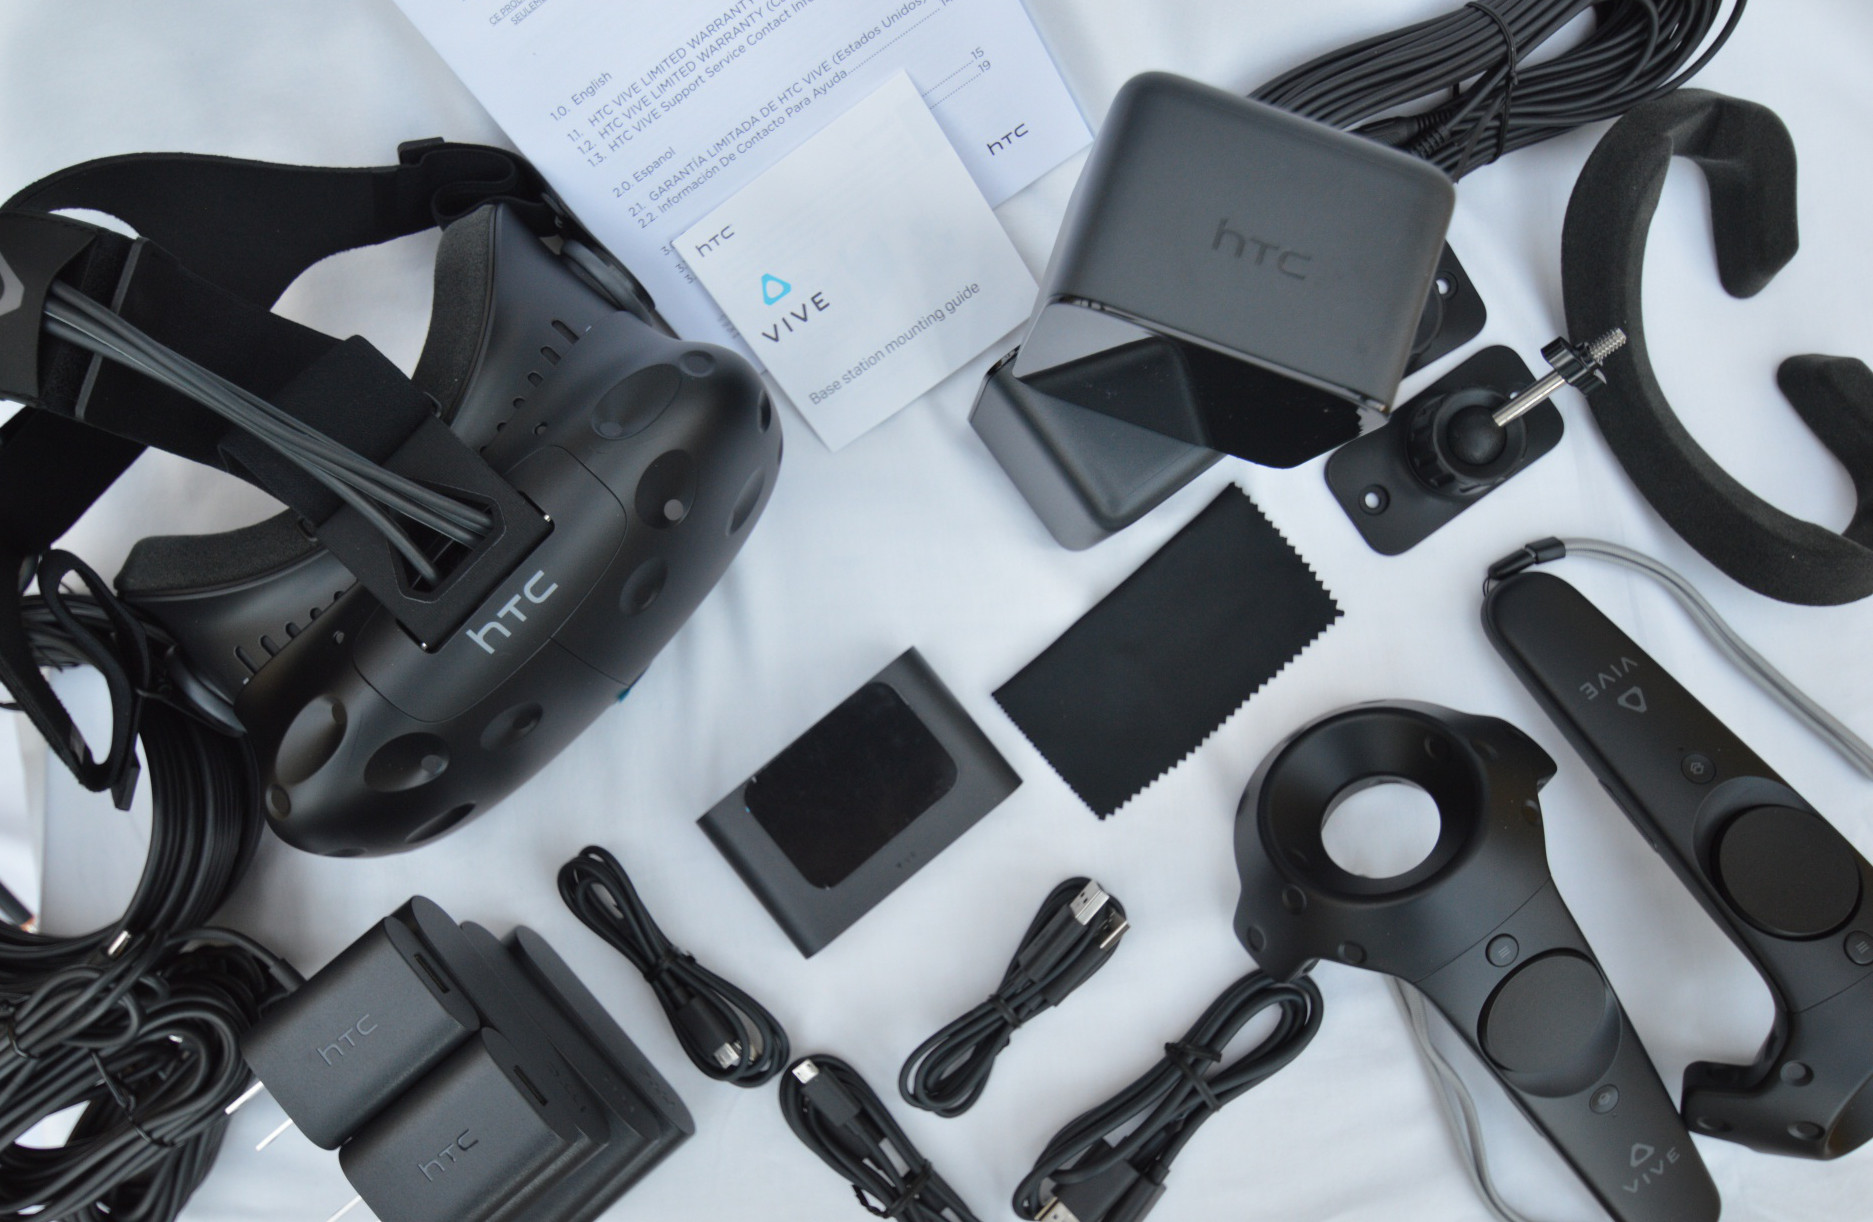 HTC Vive Consumer Edition Has Landed, We Unbox Room-scale VR